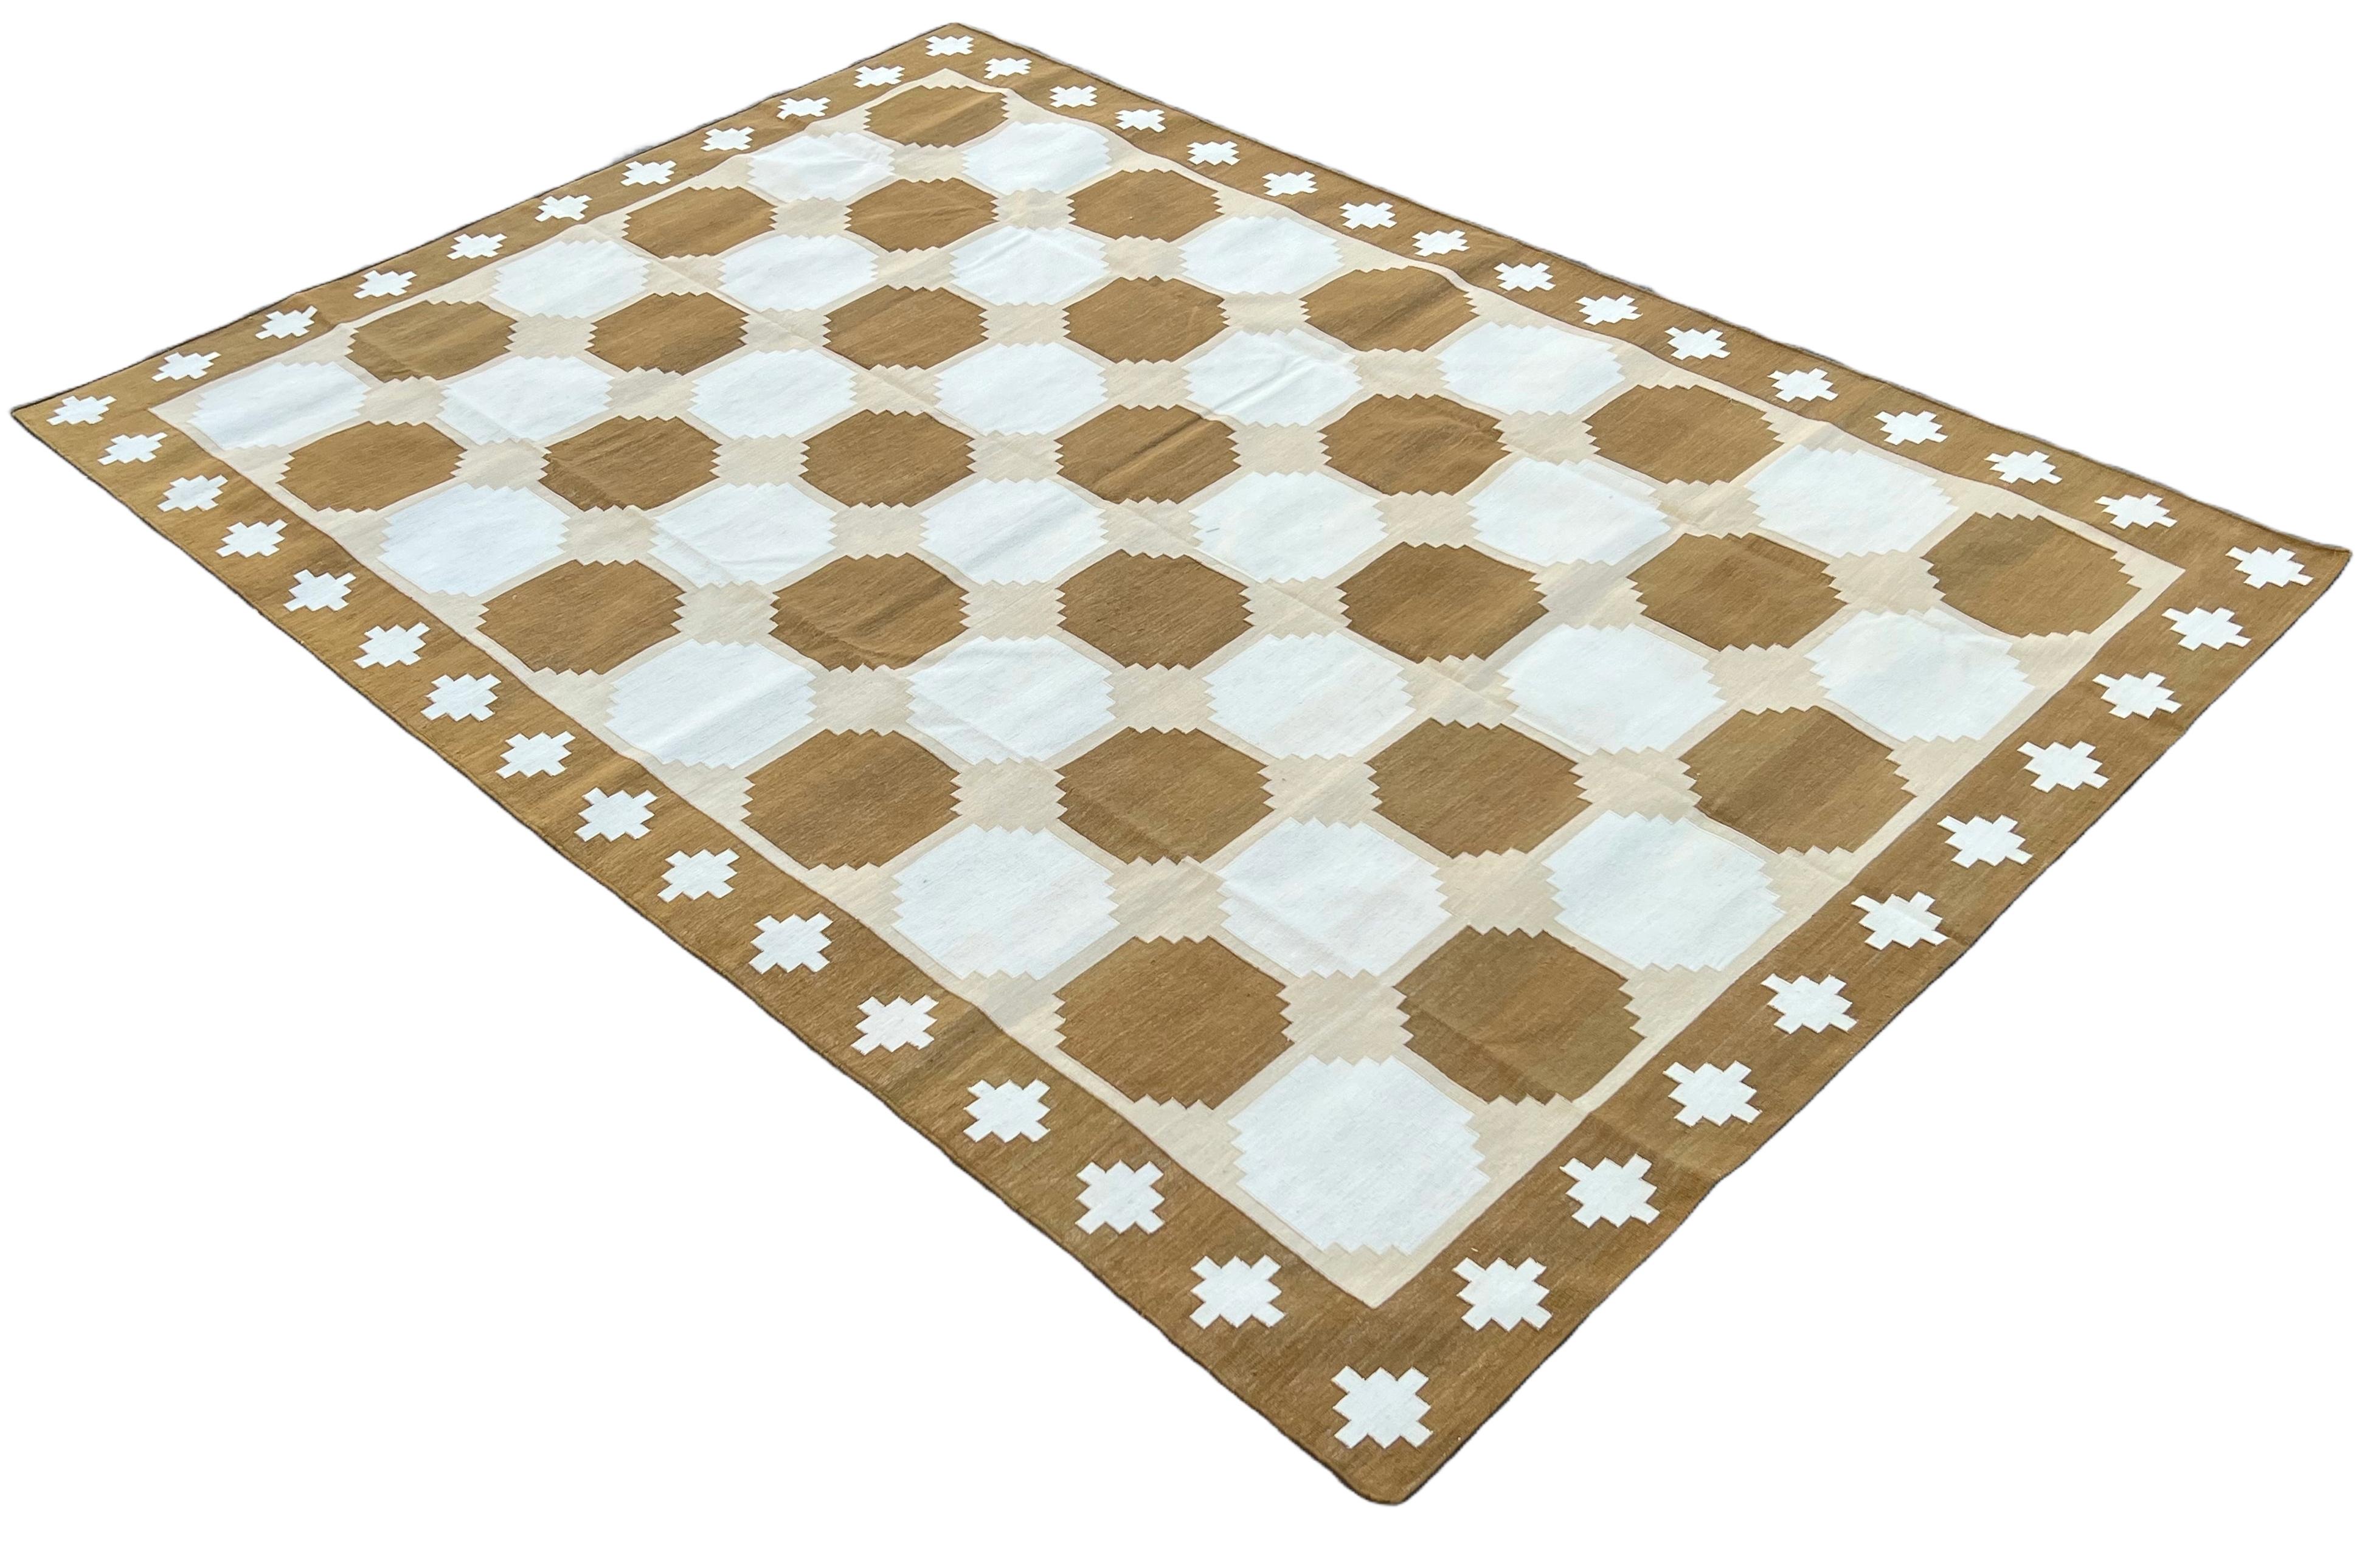 Cotton Vegetable Dyed Reversible Beige And Brown Indian Star Geometric Rug - 8'x10'
These special flat-weave dhurries are hand-woven with 15 ply 100% cotton yarn. Due to the special manufacturing techniques used to create our rugs, the size and